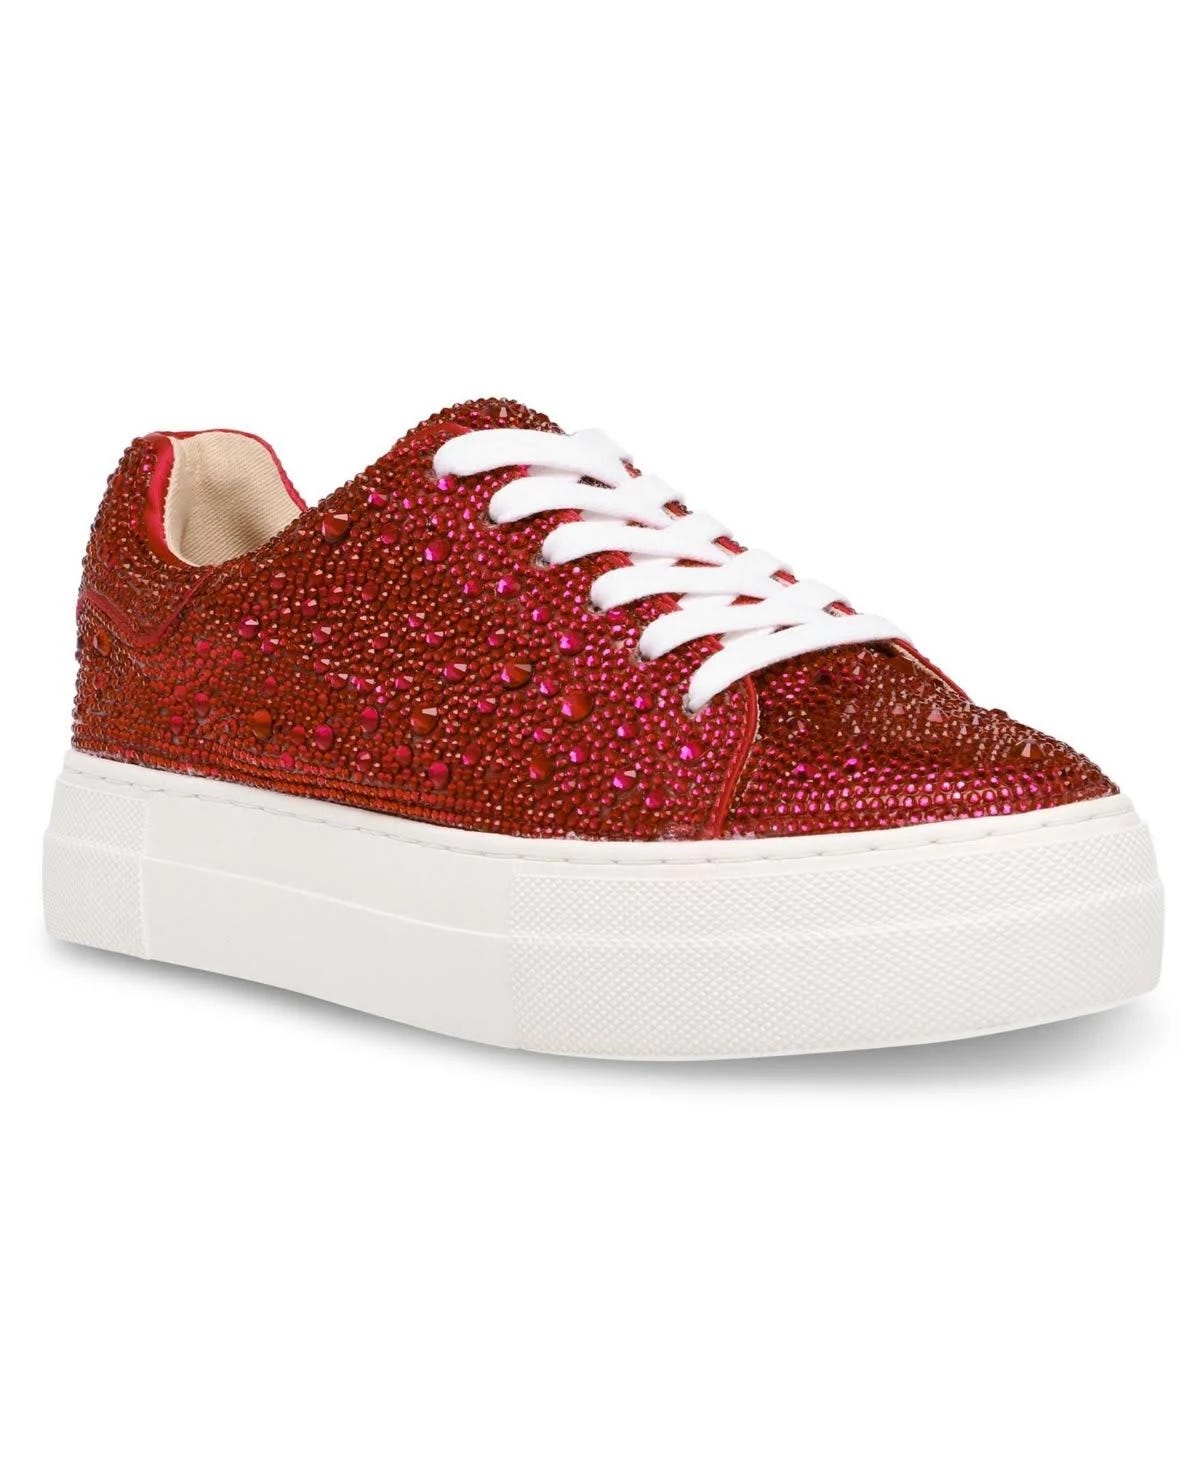 Rhinestone-Embellished Red Sneakers by Betsey Johnson | Image